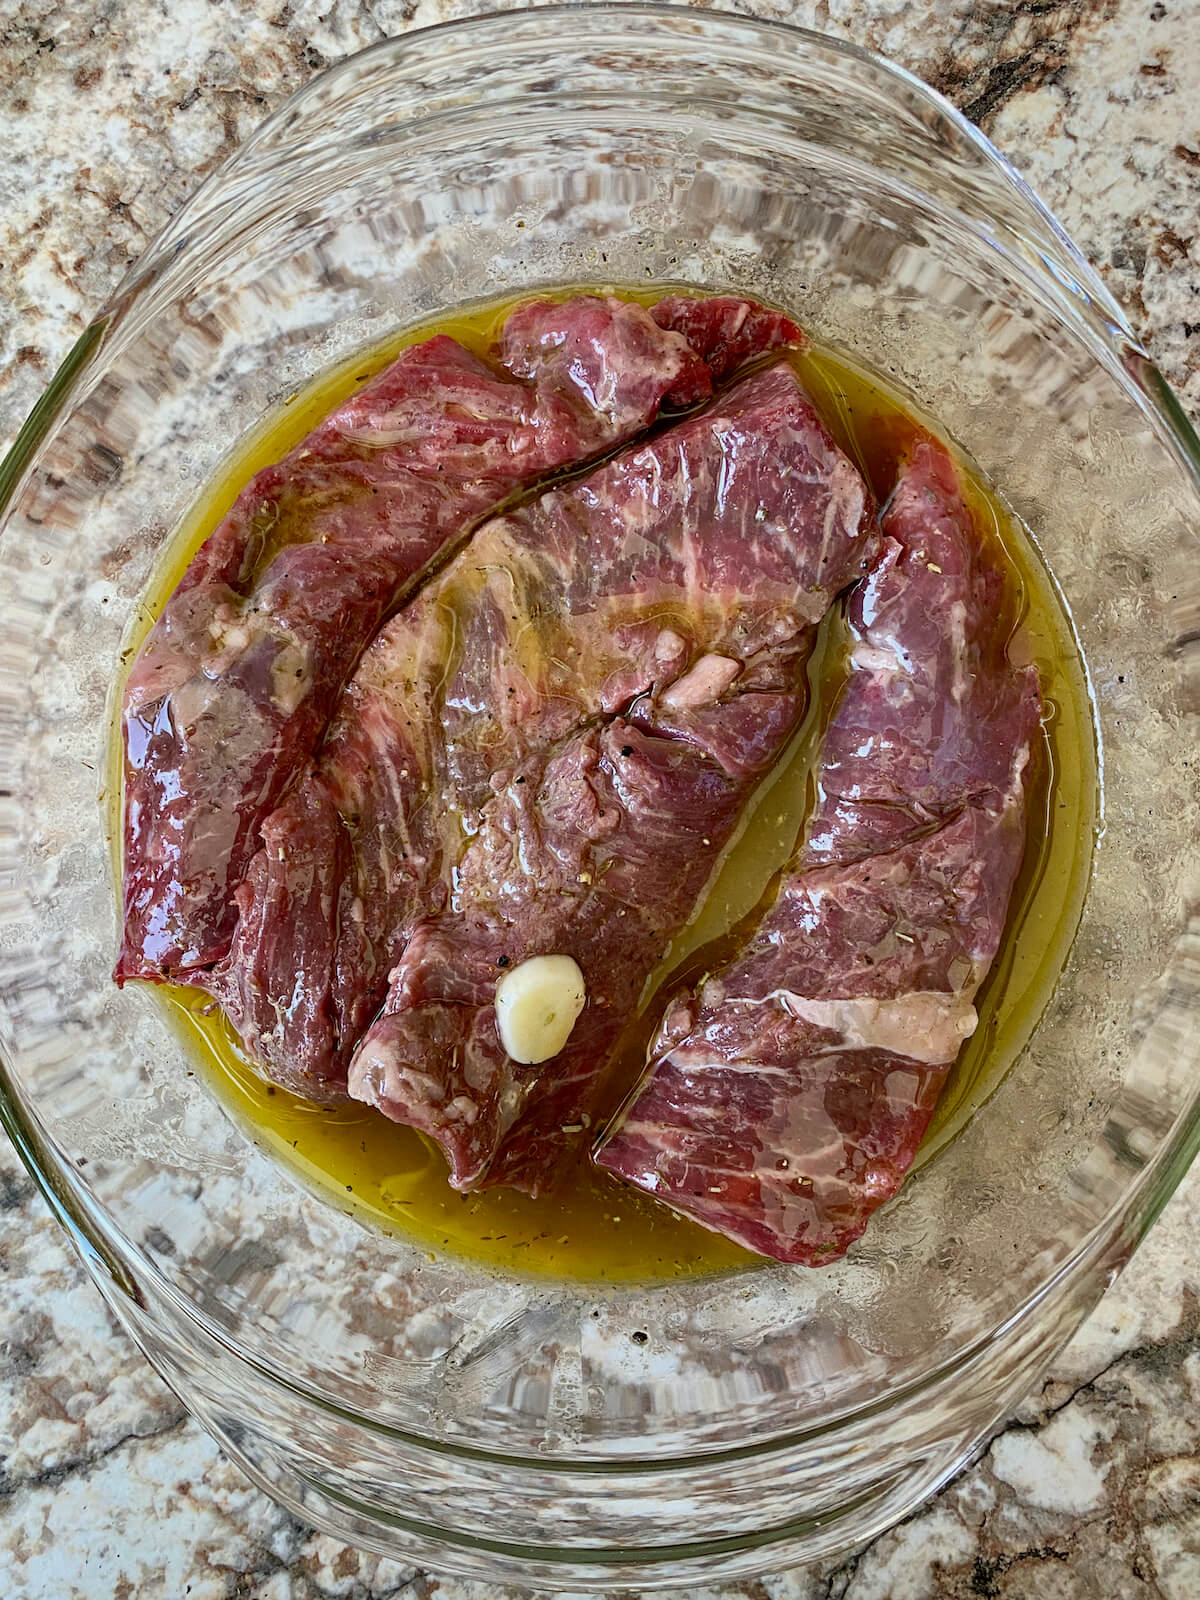 Raw strips of sirloin steak marinating in a red wine vinaigrette in a glass bowl.